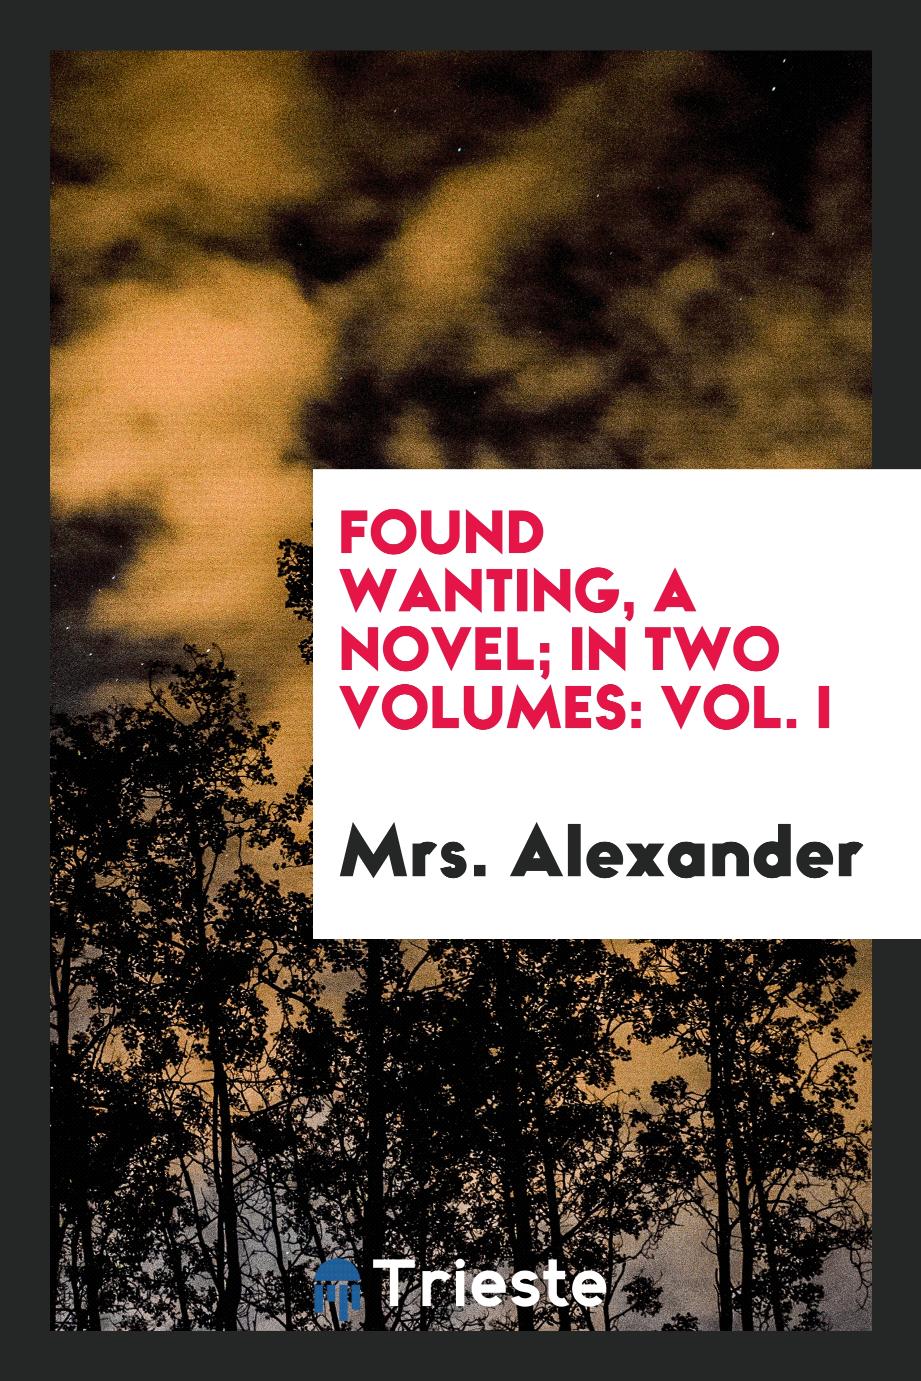 Found wanting, a novel; in two volumes: Vol. I